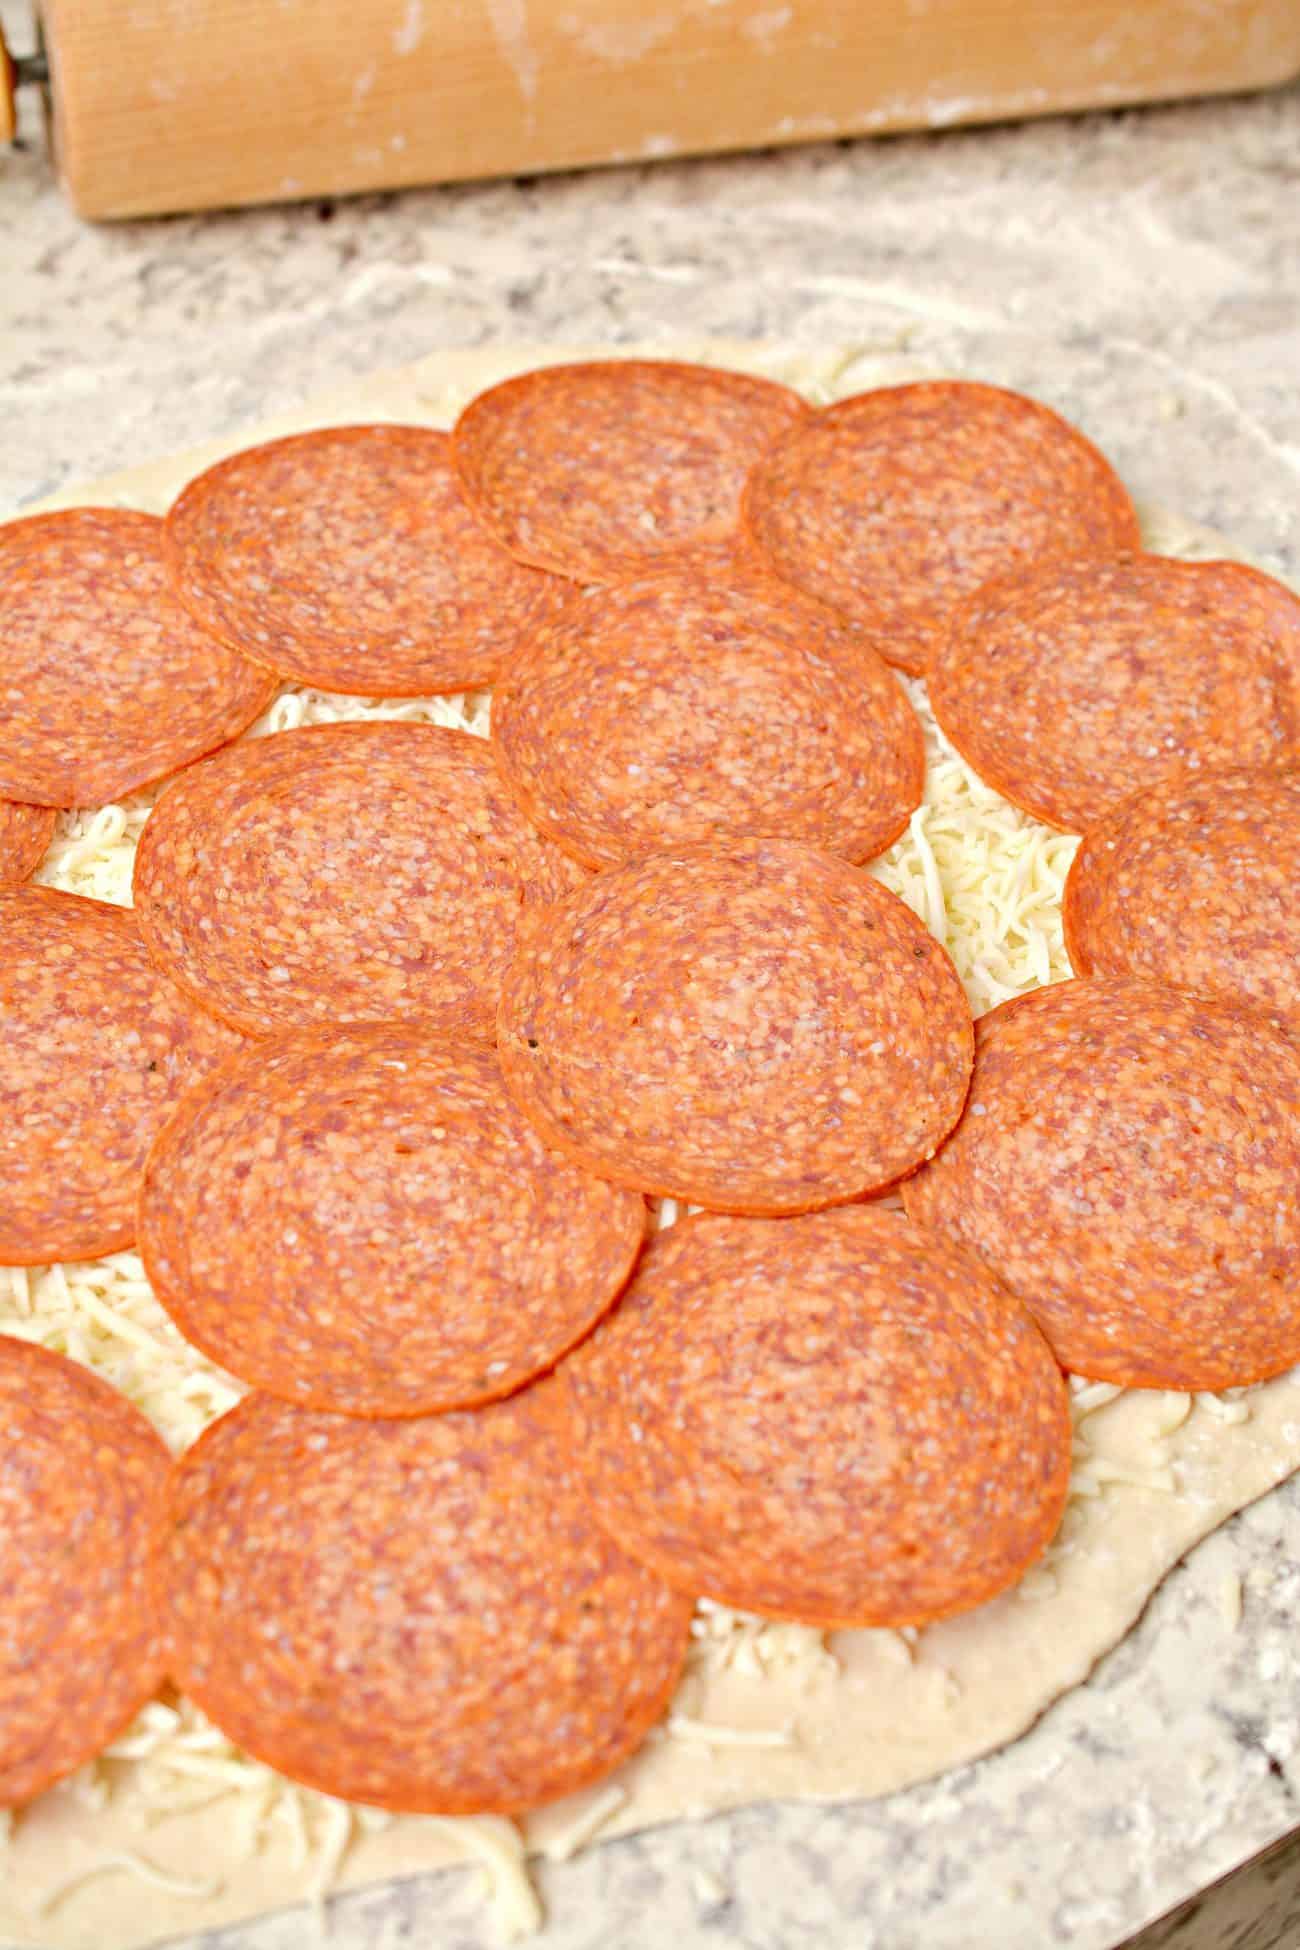 Place a layer of pepperoni slices on top of the cheese.